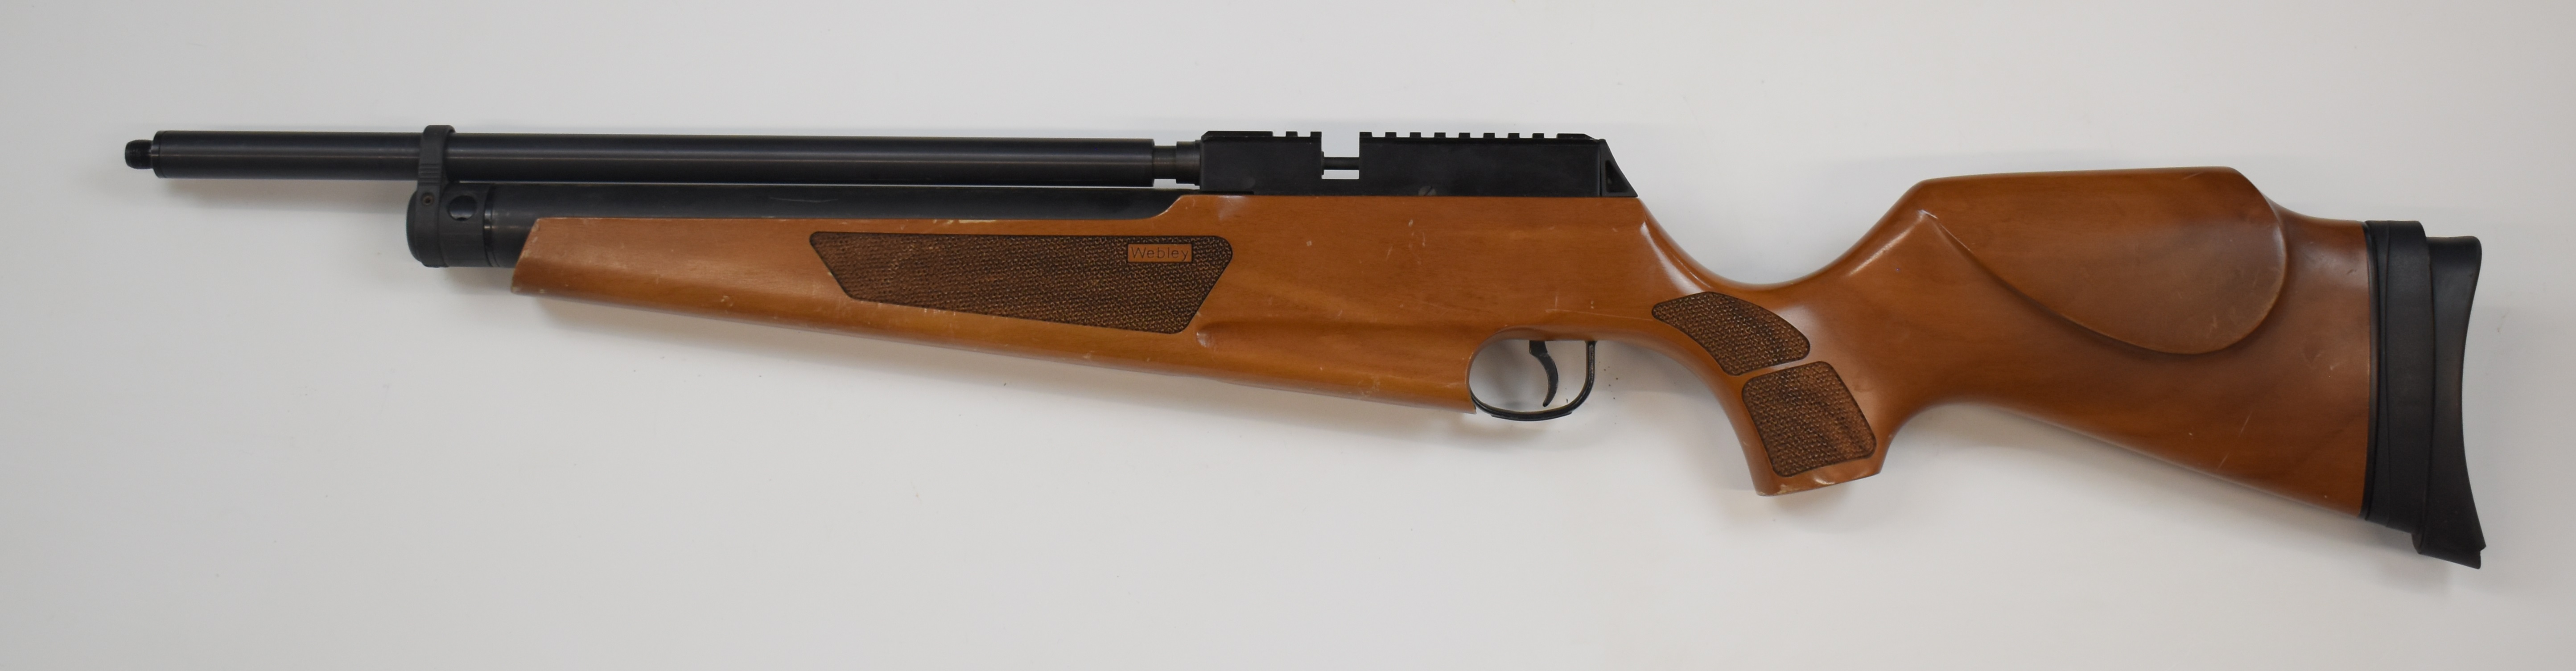 Webley Raider Classic .22 PCP air rifle with textured semi-pistol grip and forend, raised cheek - Image 7 of 10